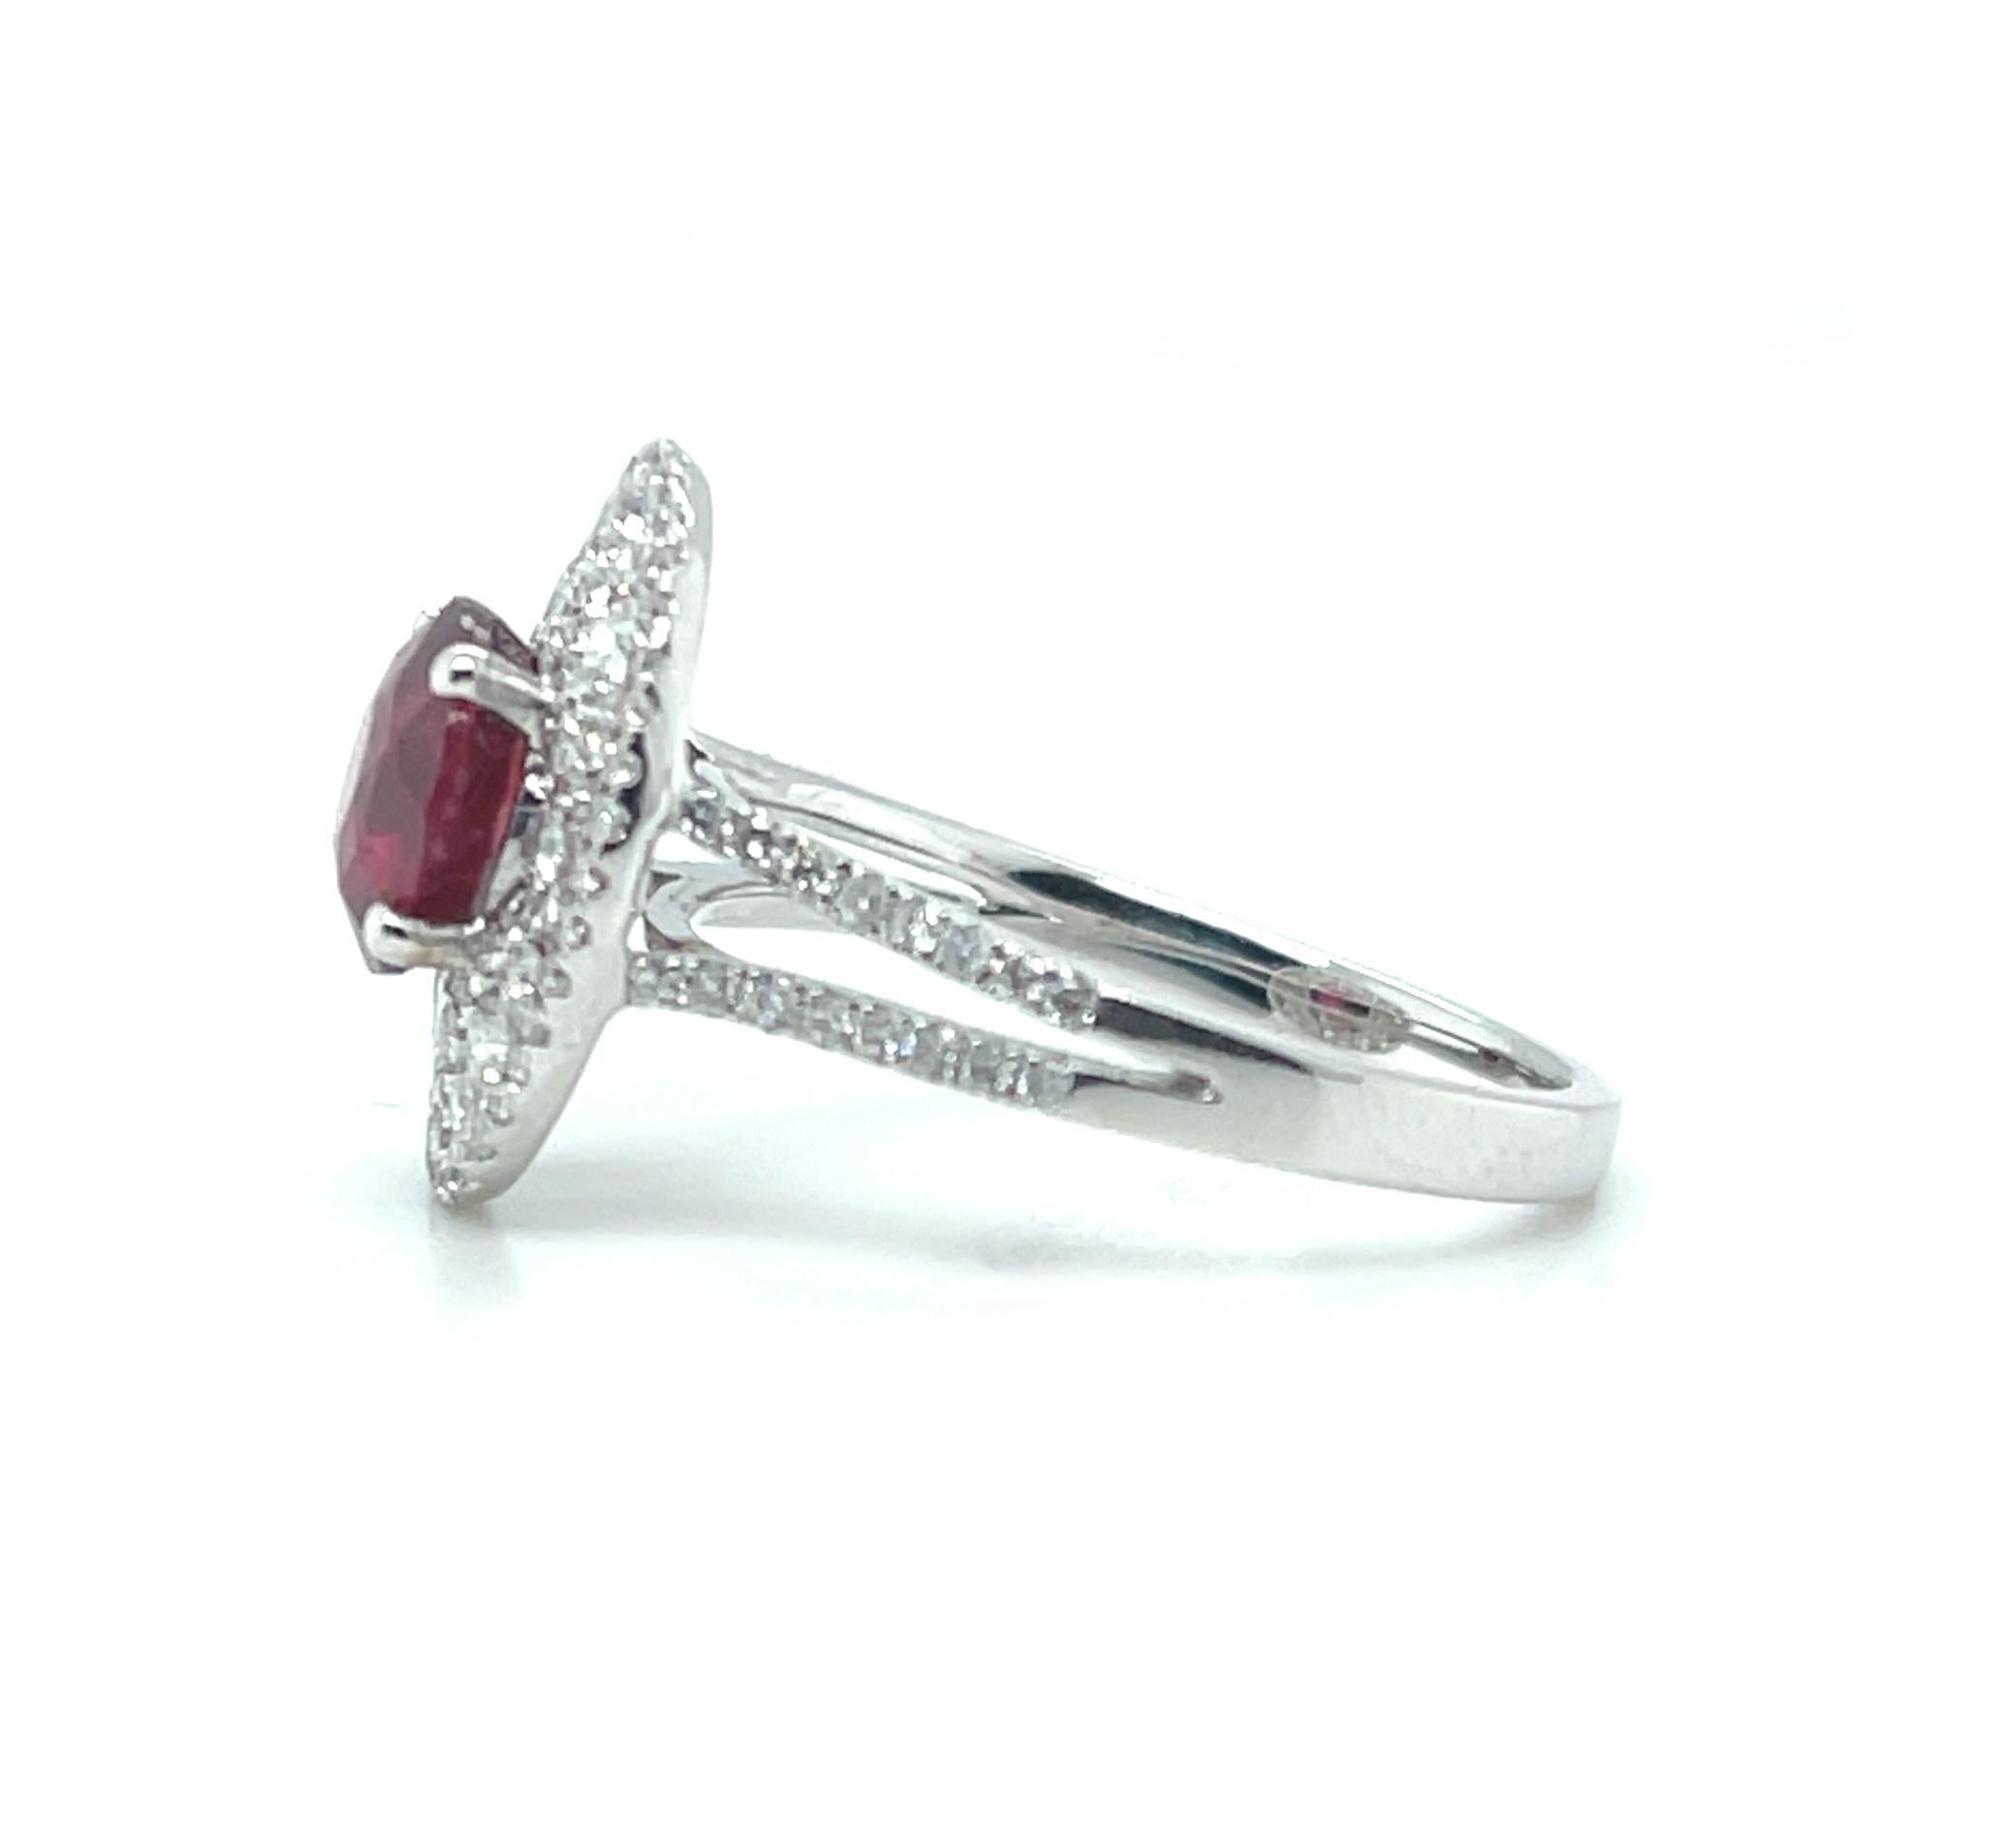 GIA Certified 1.57 Carat Ruby and Diamond Edwardian Inspired Cocktail Ring  For Sale 2